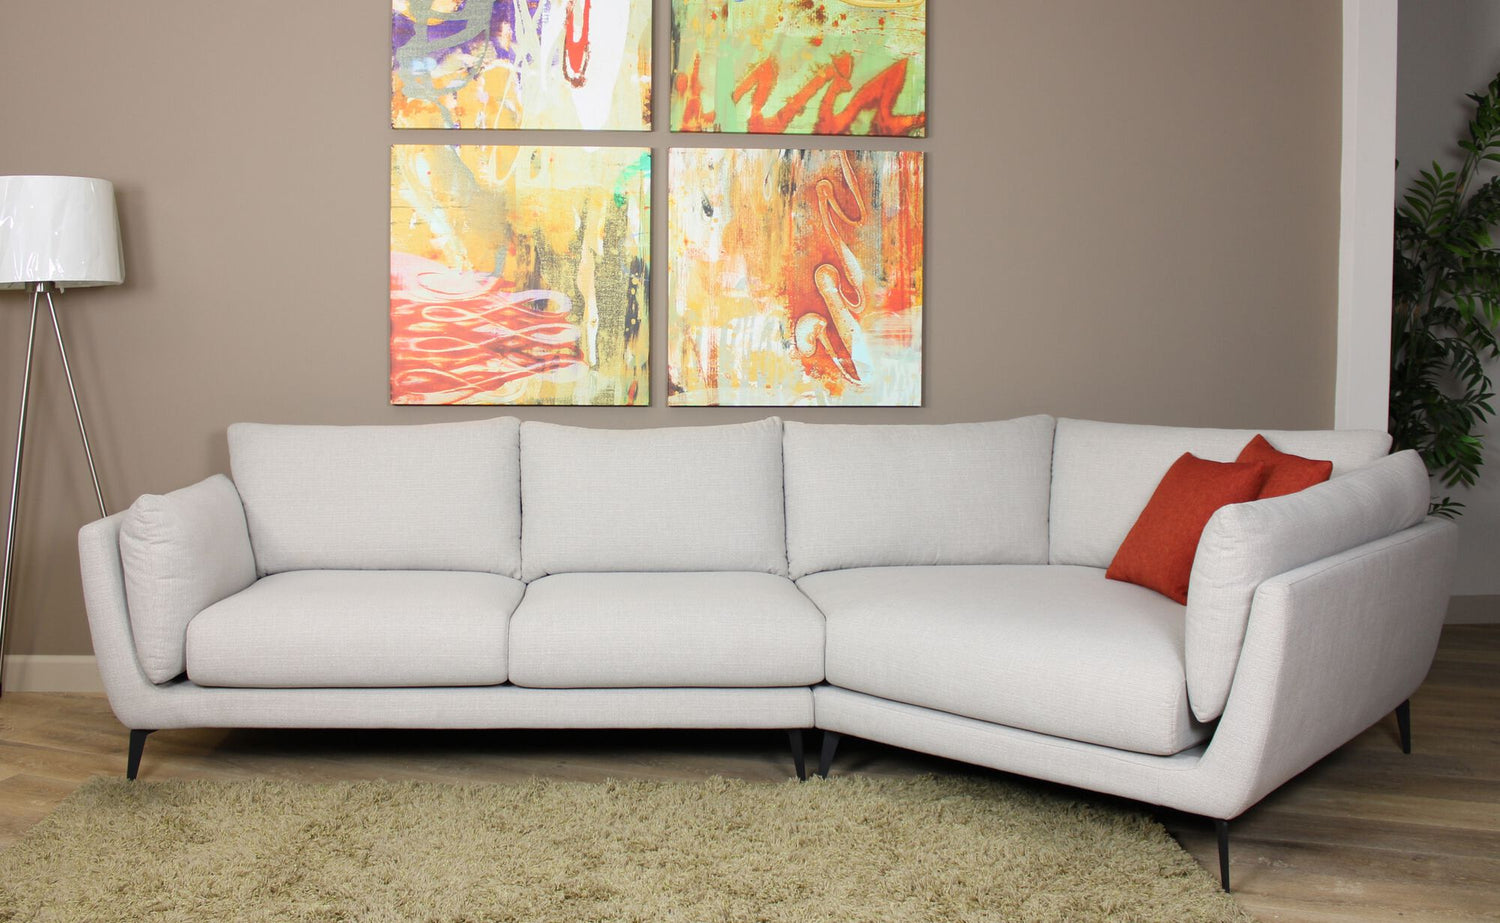 A stylish living room with a light grey sectional sofa adorned with a red accent pillow. The sofa is placed on a green rug, beneath a set of vibrant abstract paintings on a taupe wall. A white floor lamp stands to the left and a potted plant is on the right.